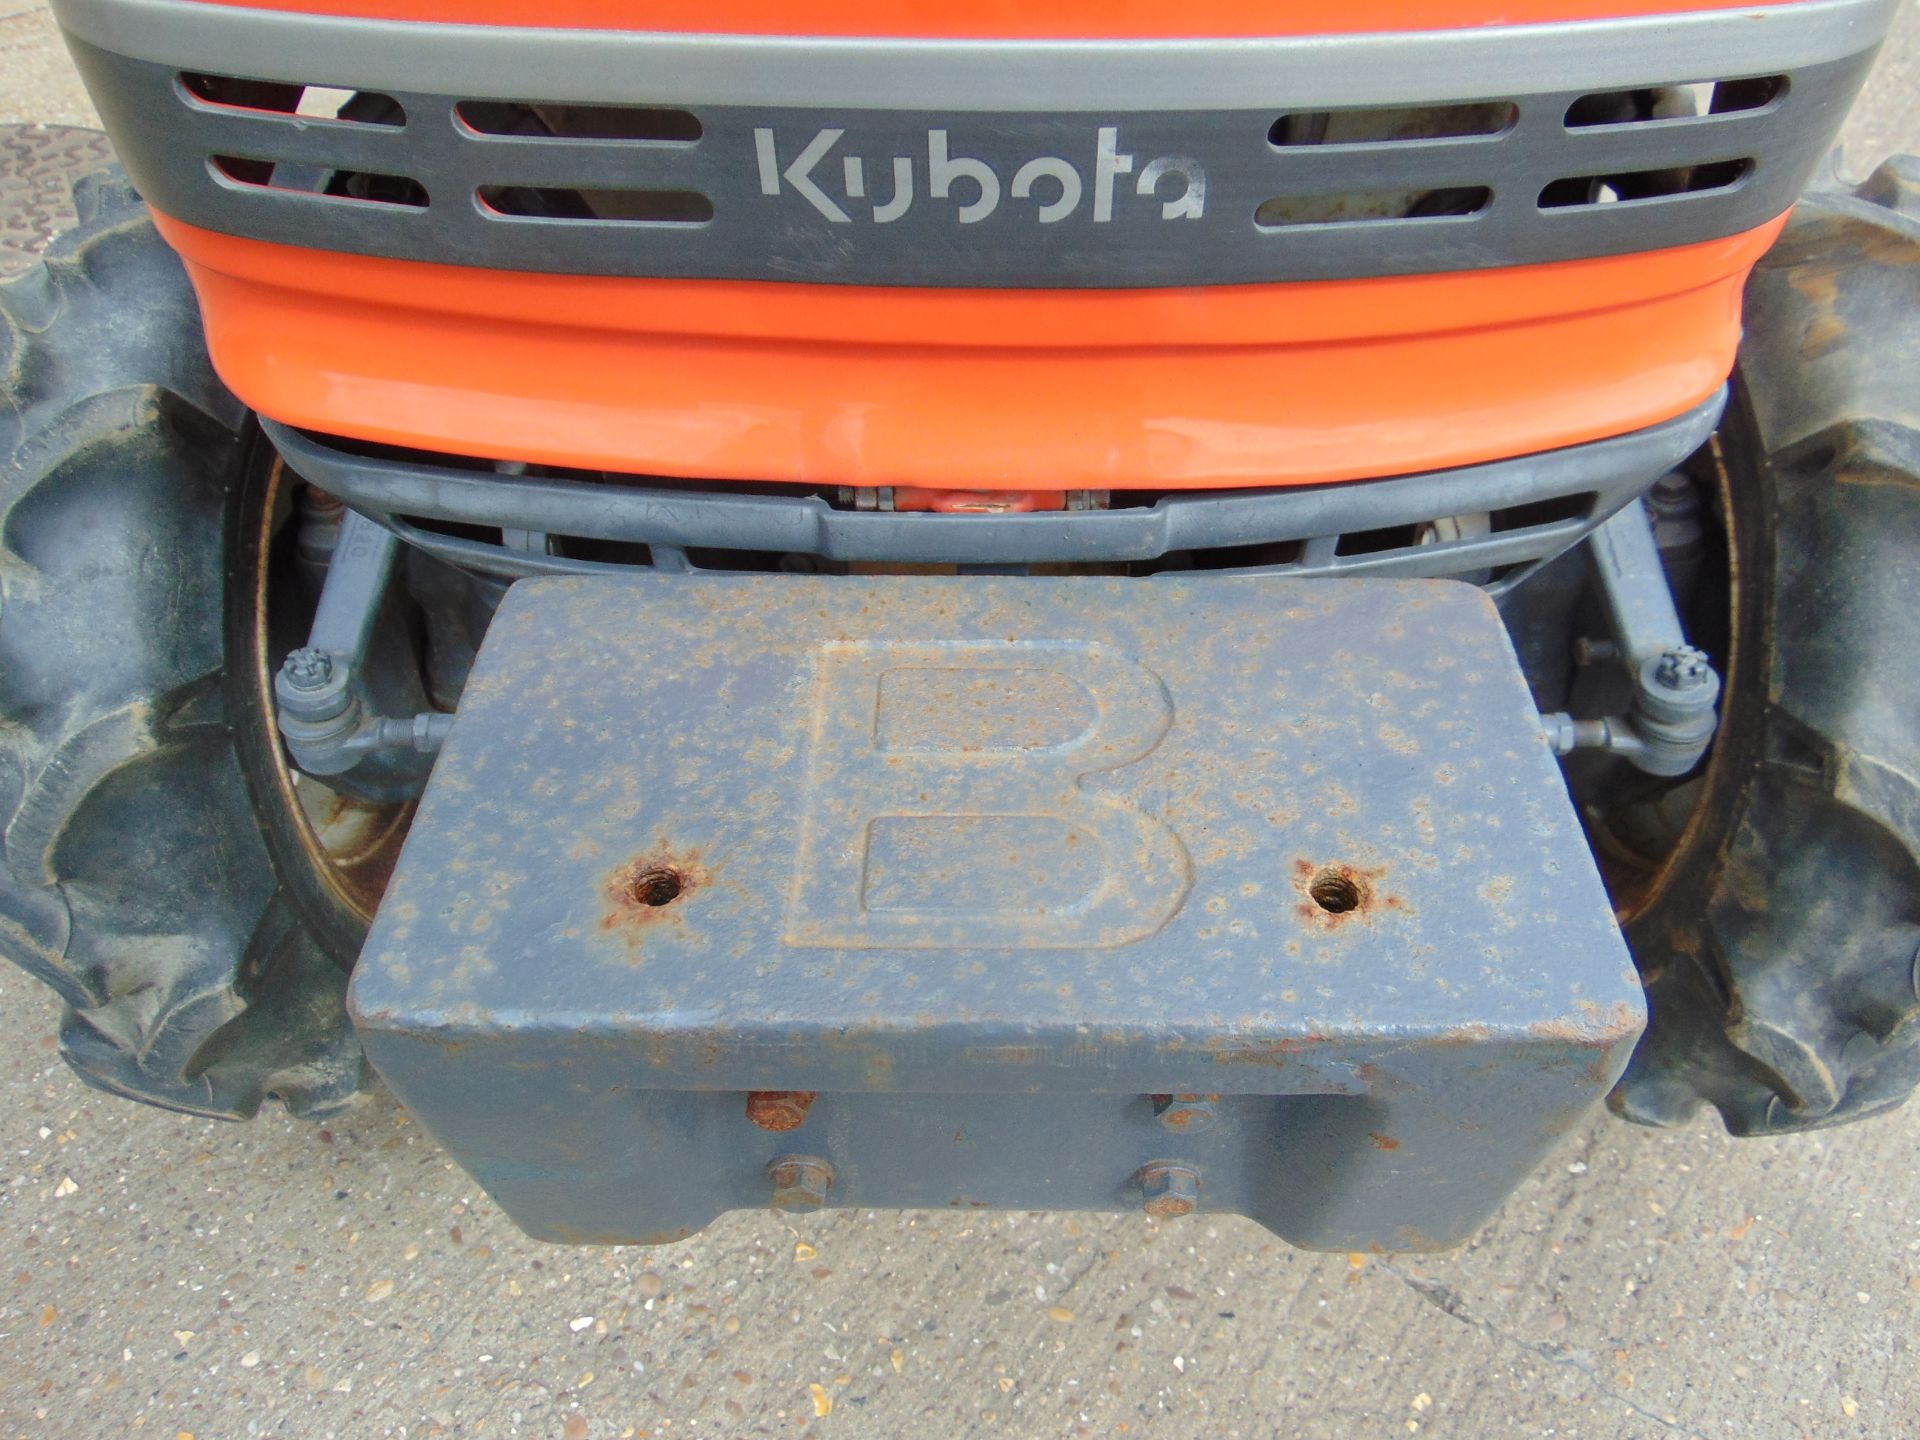 Kubota A13 Compact Tractor w/ Rotary Tiller - Image 16 of 23